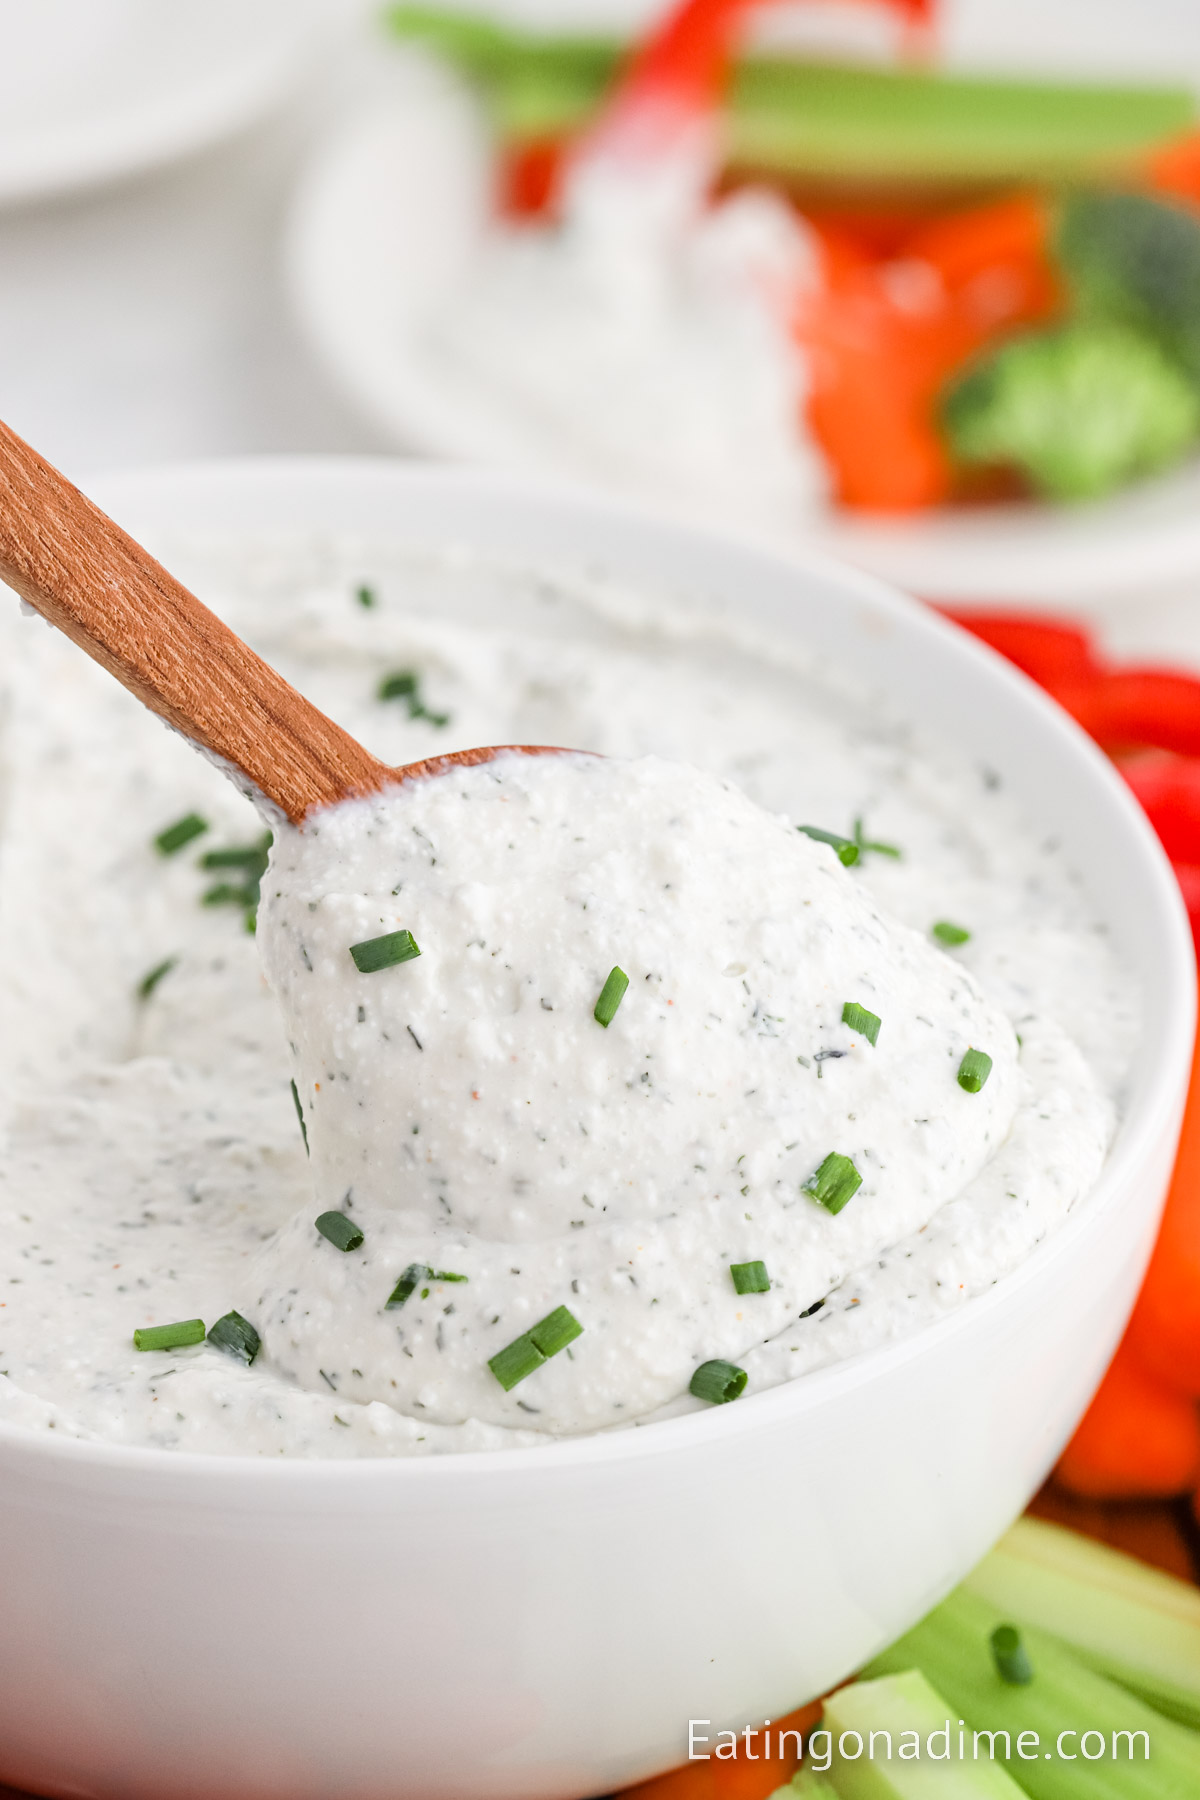 Close up image of cottage cheese dip with a wooden spoon